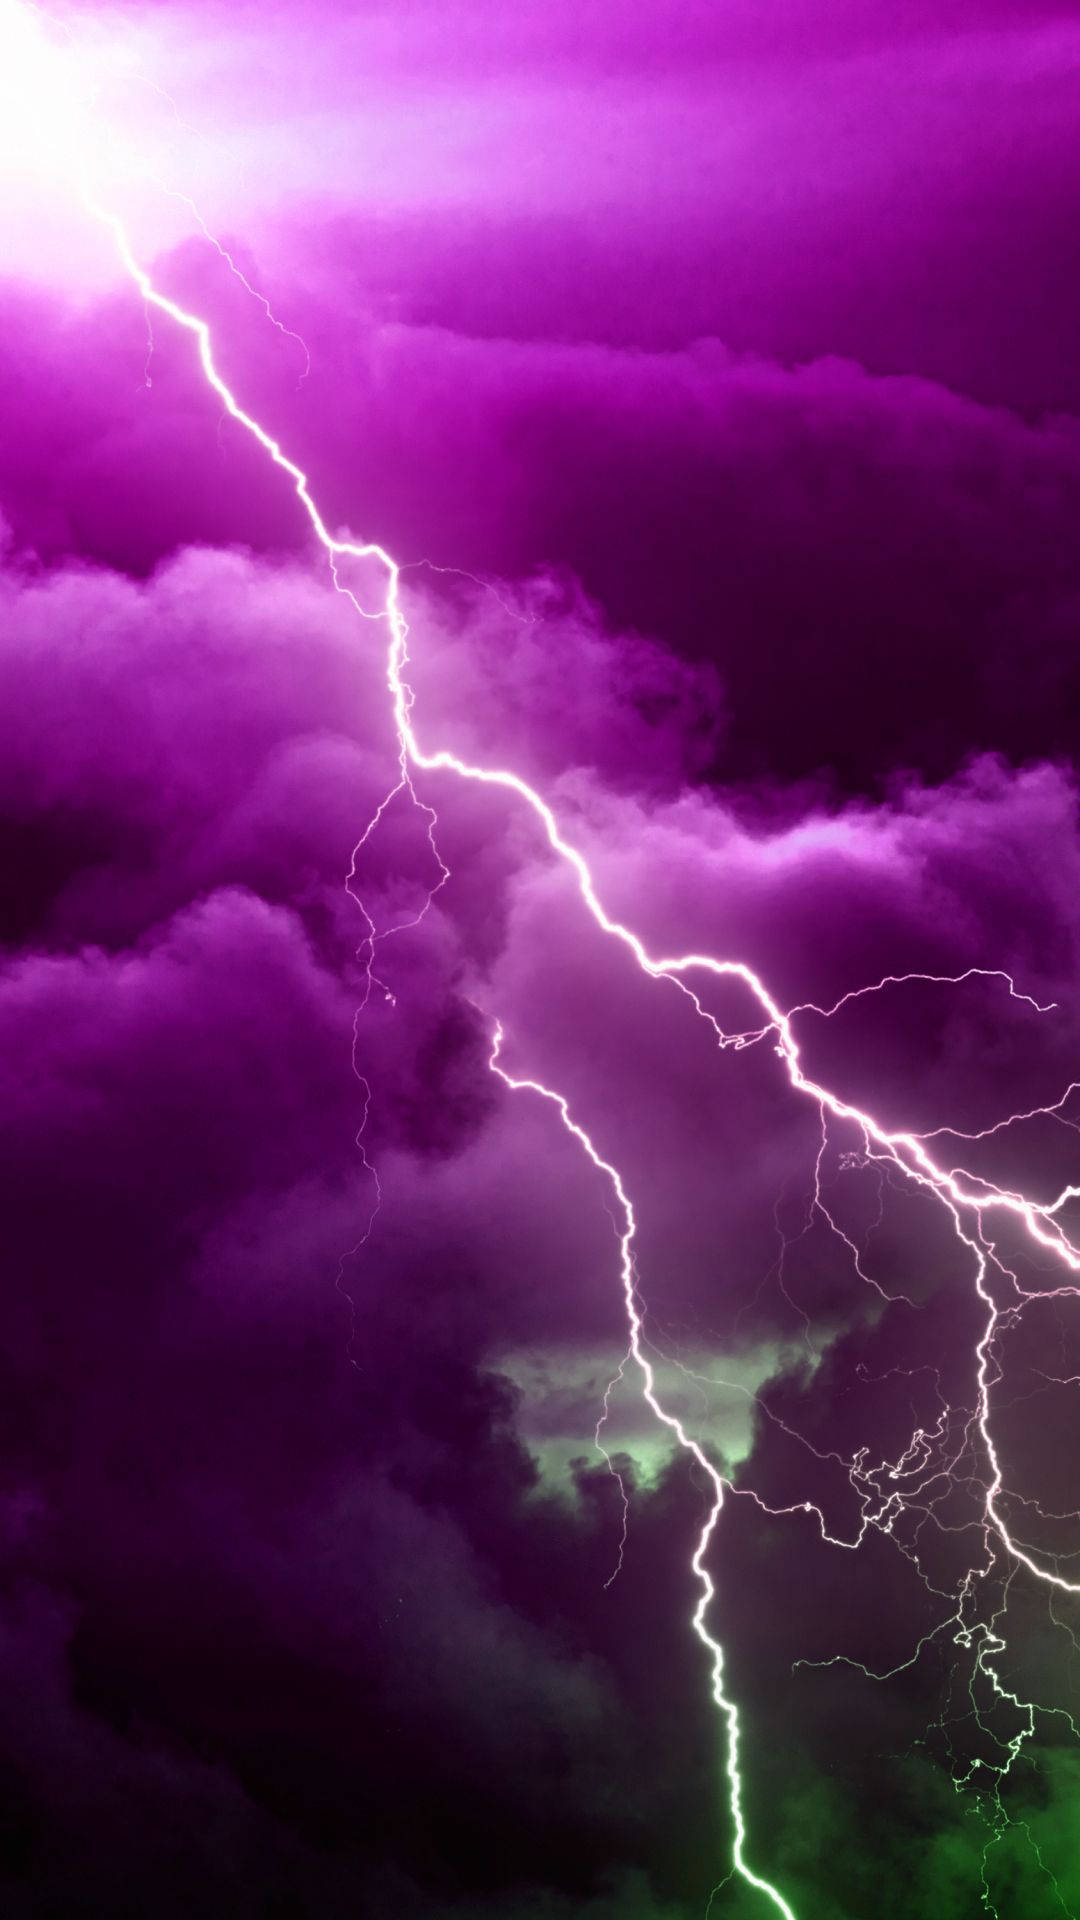 IPhone wallpaper lightning storm with image resolution 1080x1920 pixel. You can make this wallpaper for your iPhone 5, 6, 7, 8, X backgrounds, Mobile Screensaver, or iPad Lock Screen - Storm